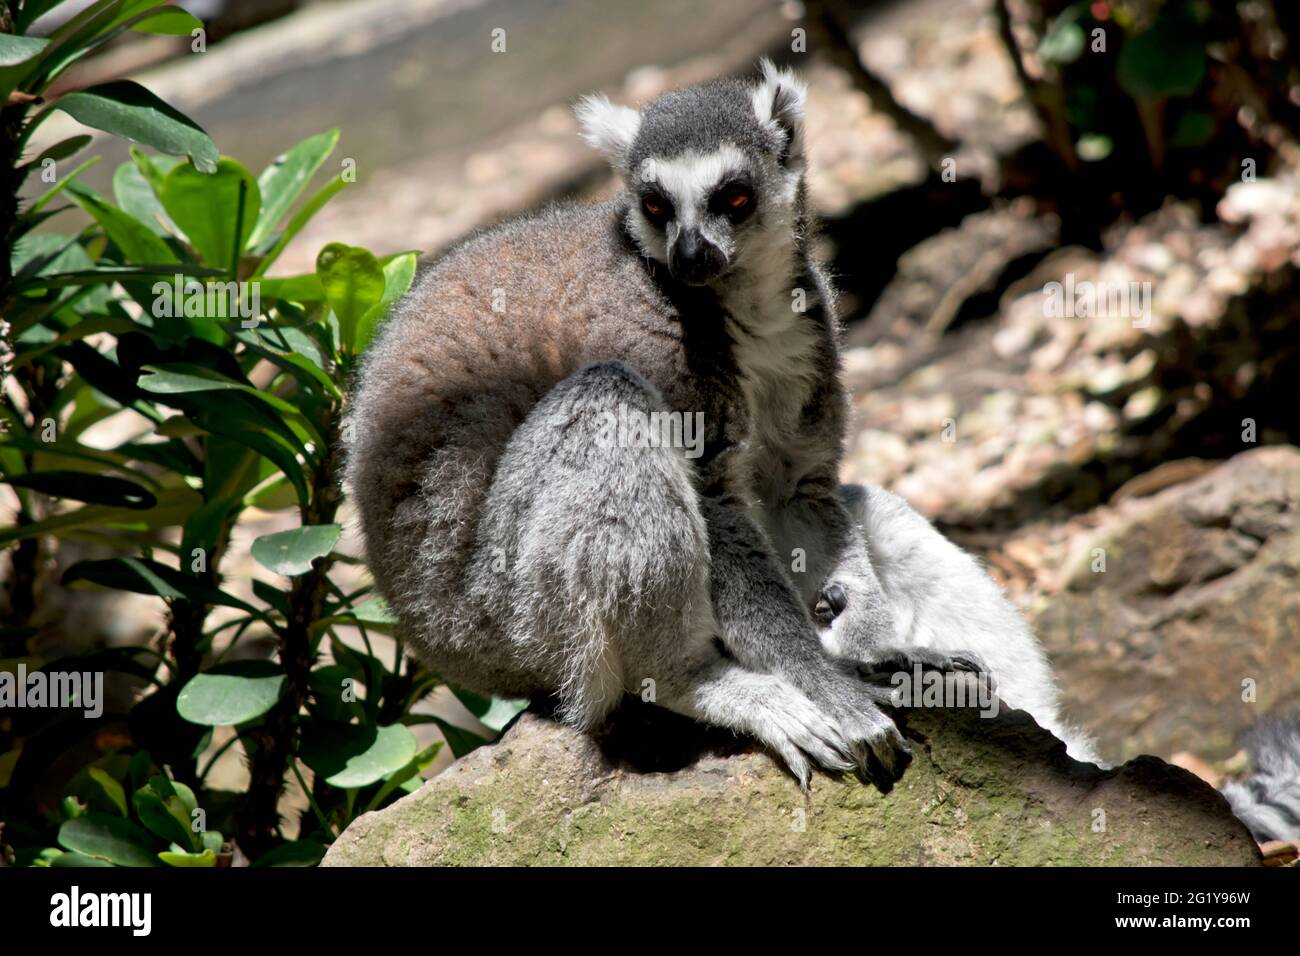 the ring tailed lemur is sitting on a rock Stock Photo